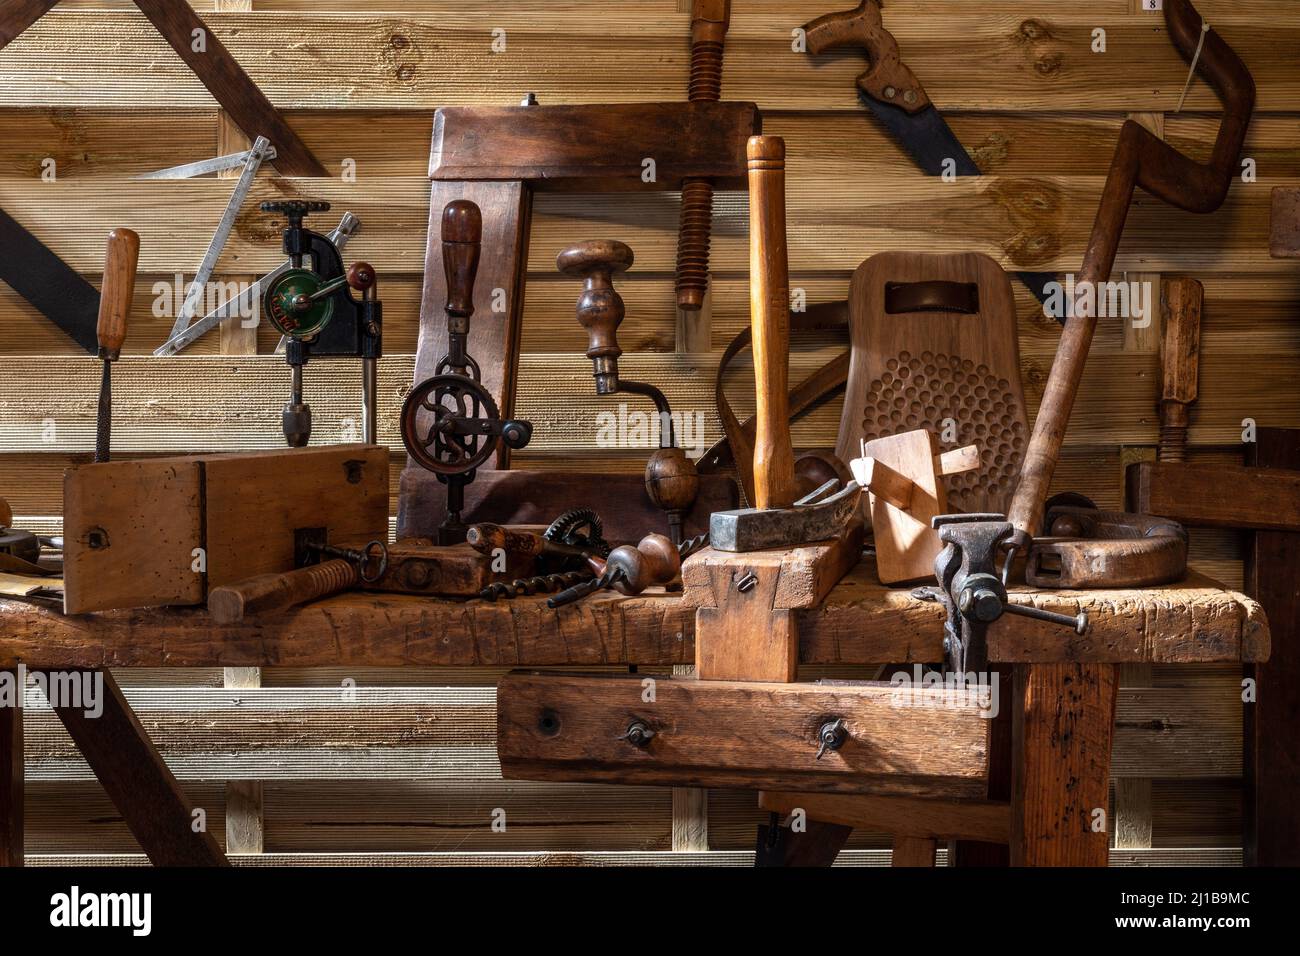 THE TOOLS OF THE WOODWORKER AND CABINET-MAKER, MUSEUM OF LIFE AND METIERS OF THE PAST, BRETEUIL, EURE, NORMANDY, FRANCE Stock Photo